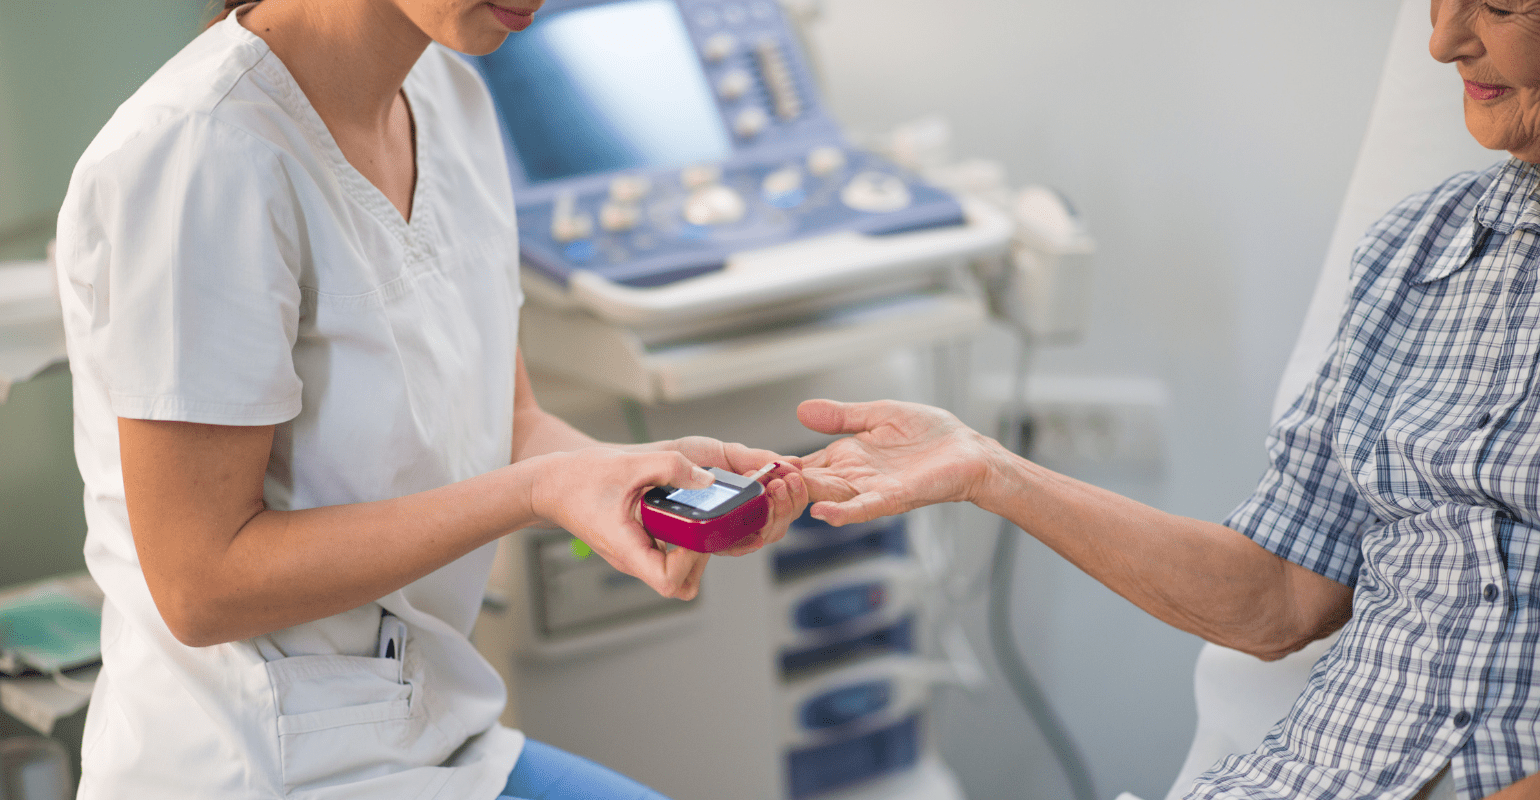 The future of diabetes care in a digital world